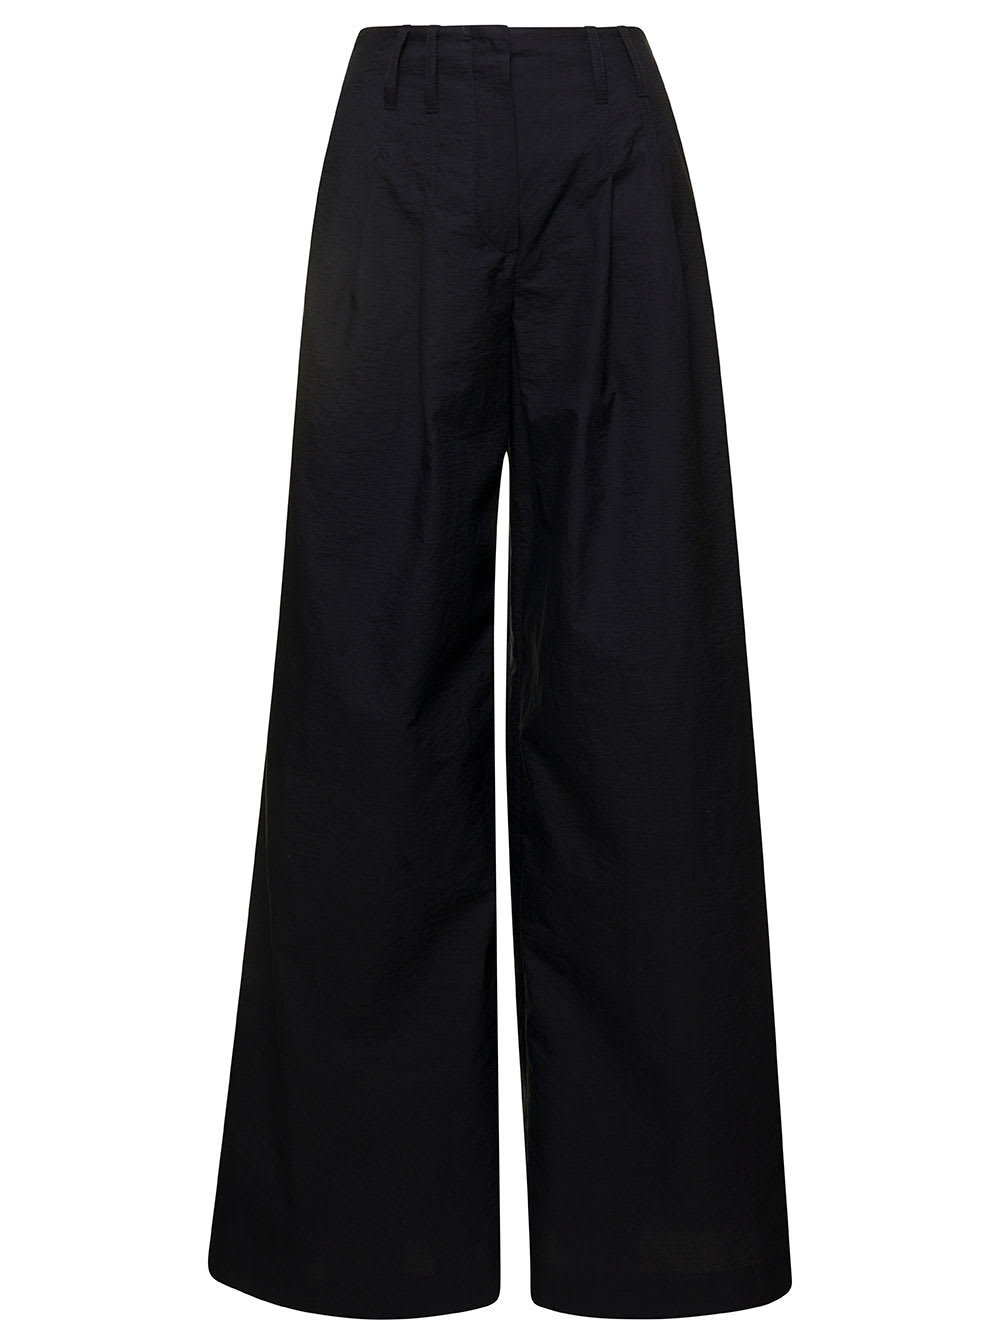 BRUNELLO CUCINELLI BLACK HIGH WAISTED FLARED TROUSERS IN COTTON BLEND WOMAN